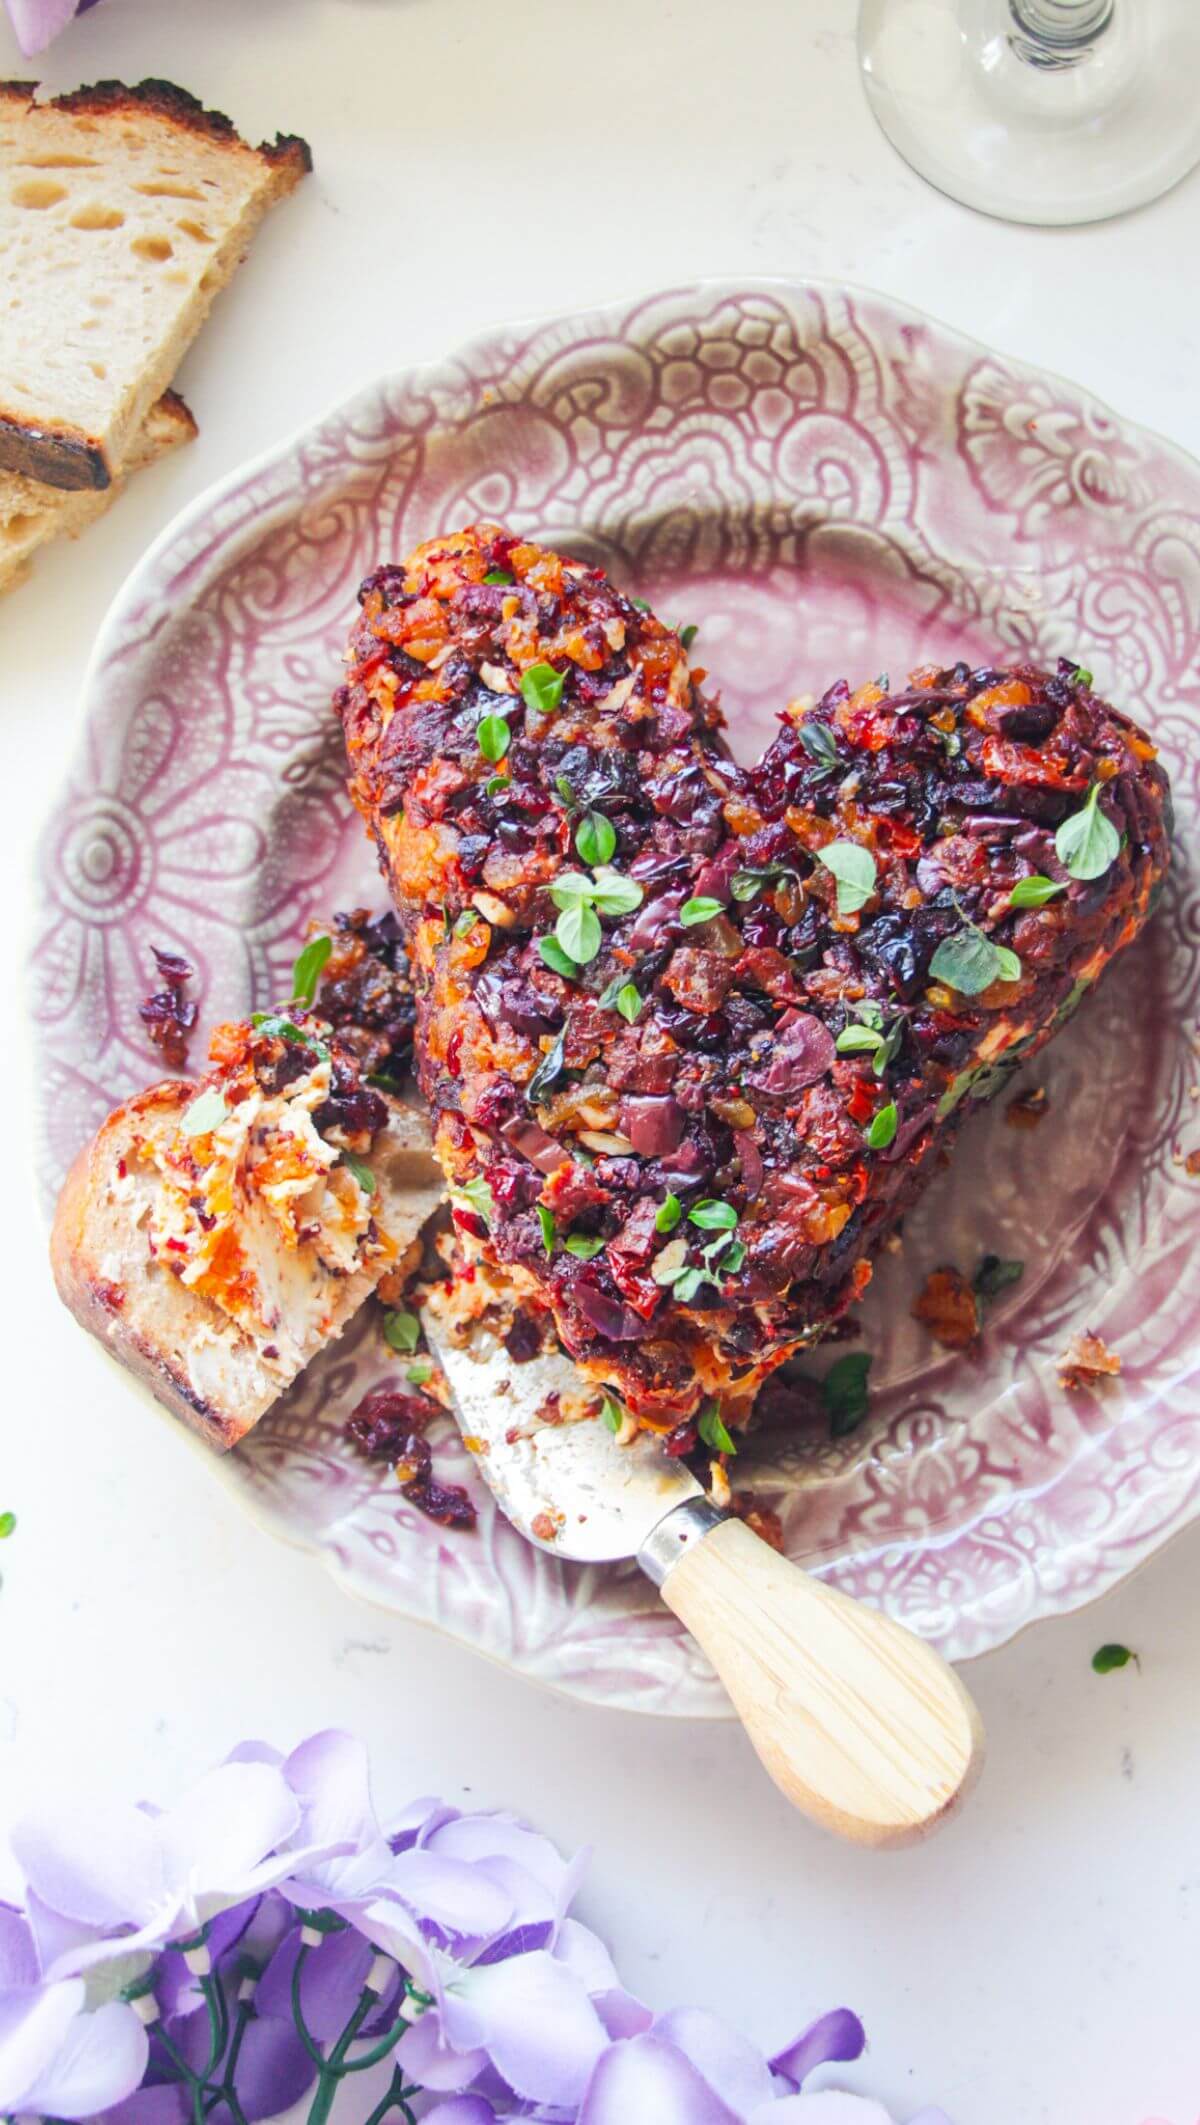 Heart shaped cheese ball, covered in dried fruit on a small pink plate, with bread on the side.